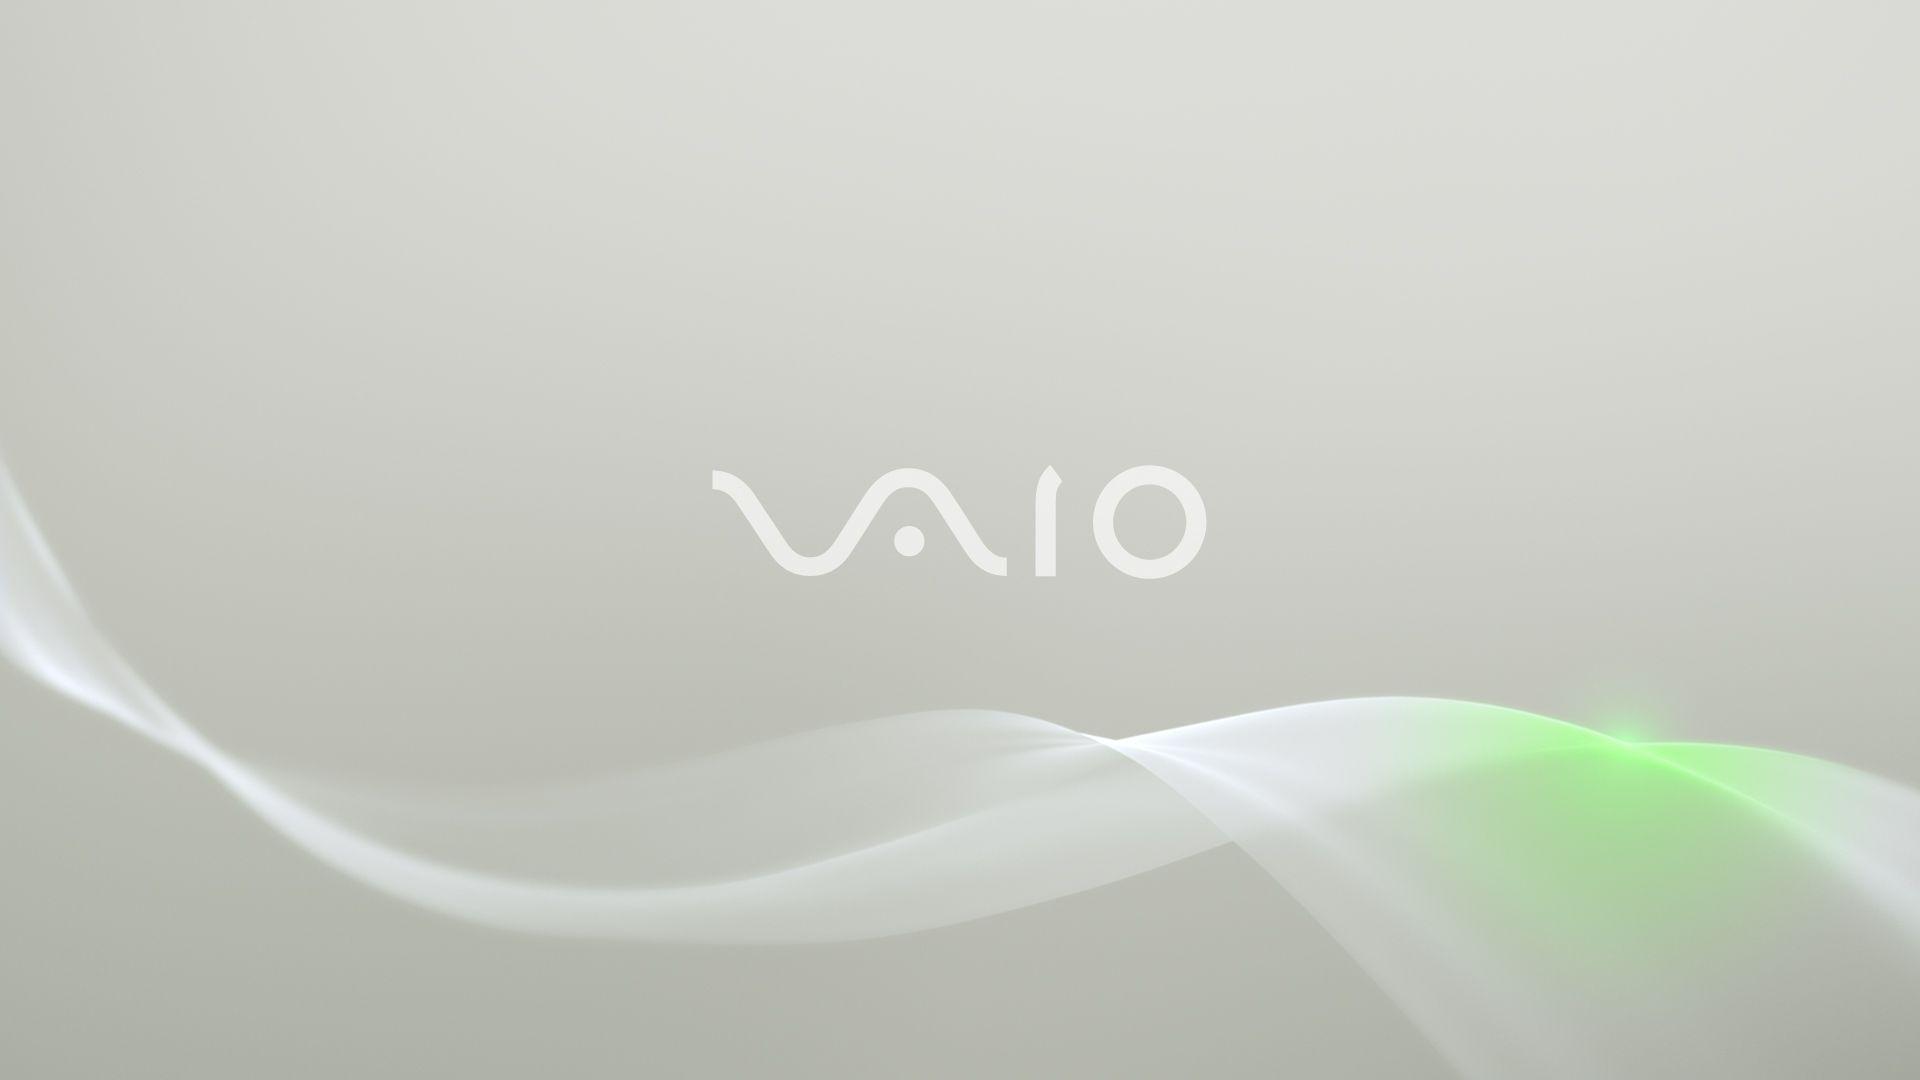 Sony Vaio Wallpapers - Wallpaper Cave